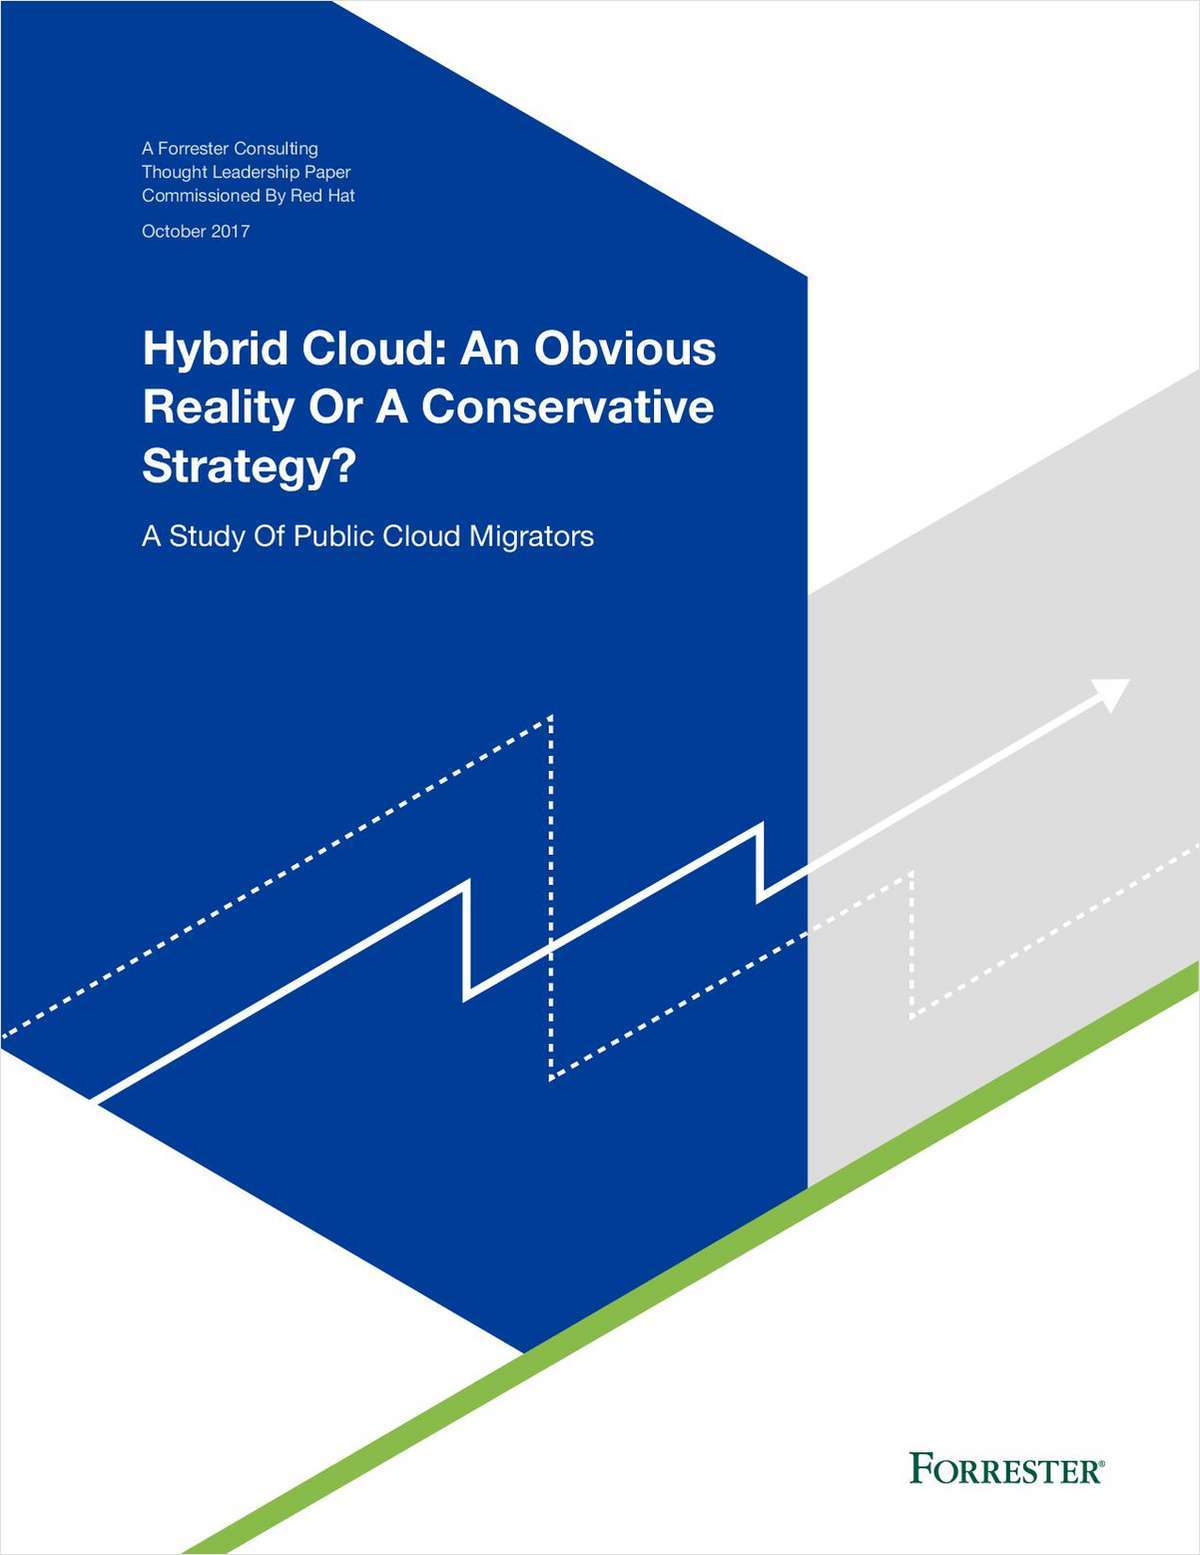 Forrester Analyst Paper: Hybrid cloud: Obvious reality or conservative strategy analyst paper